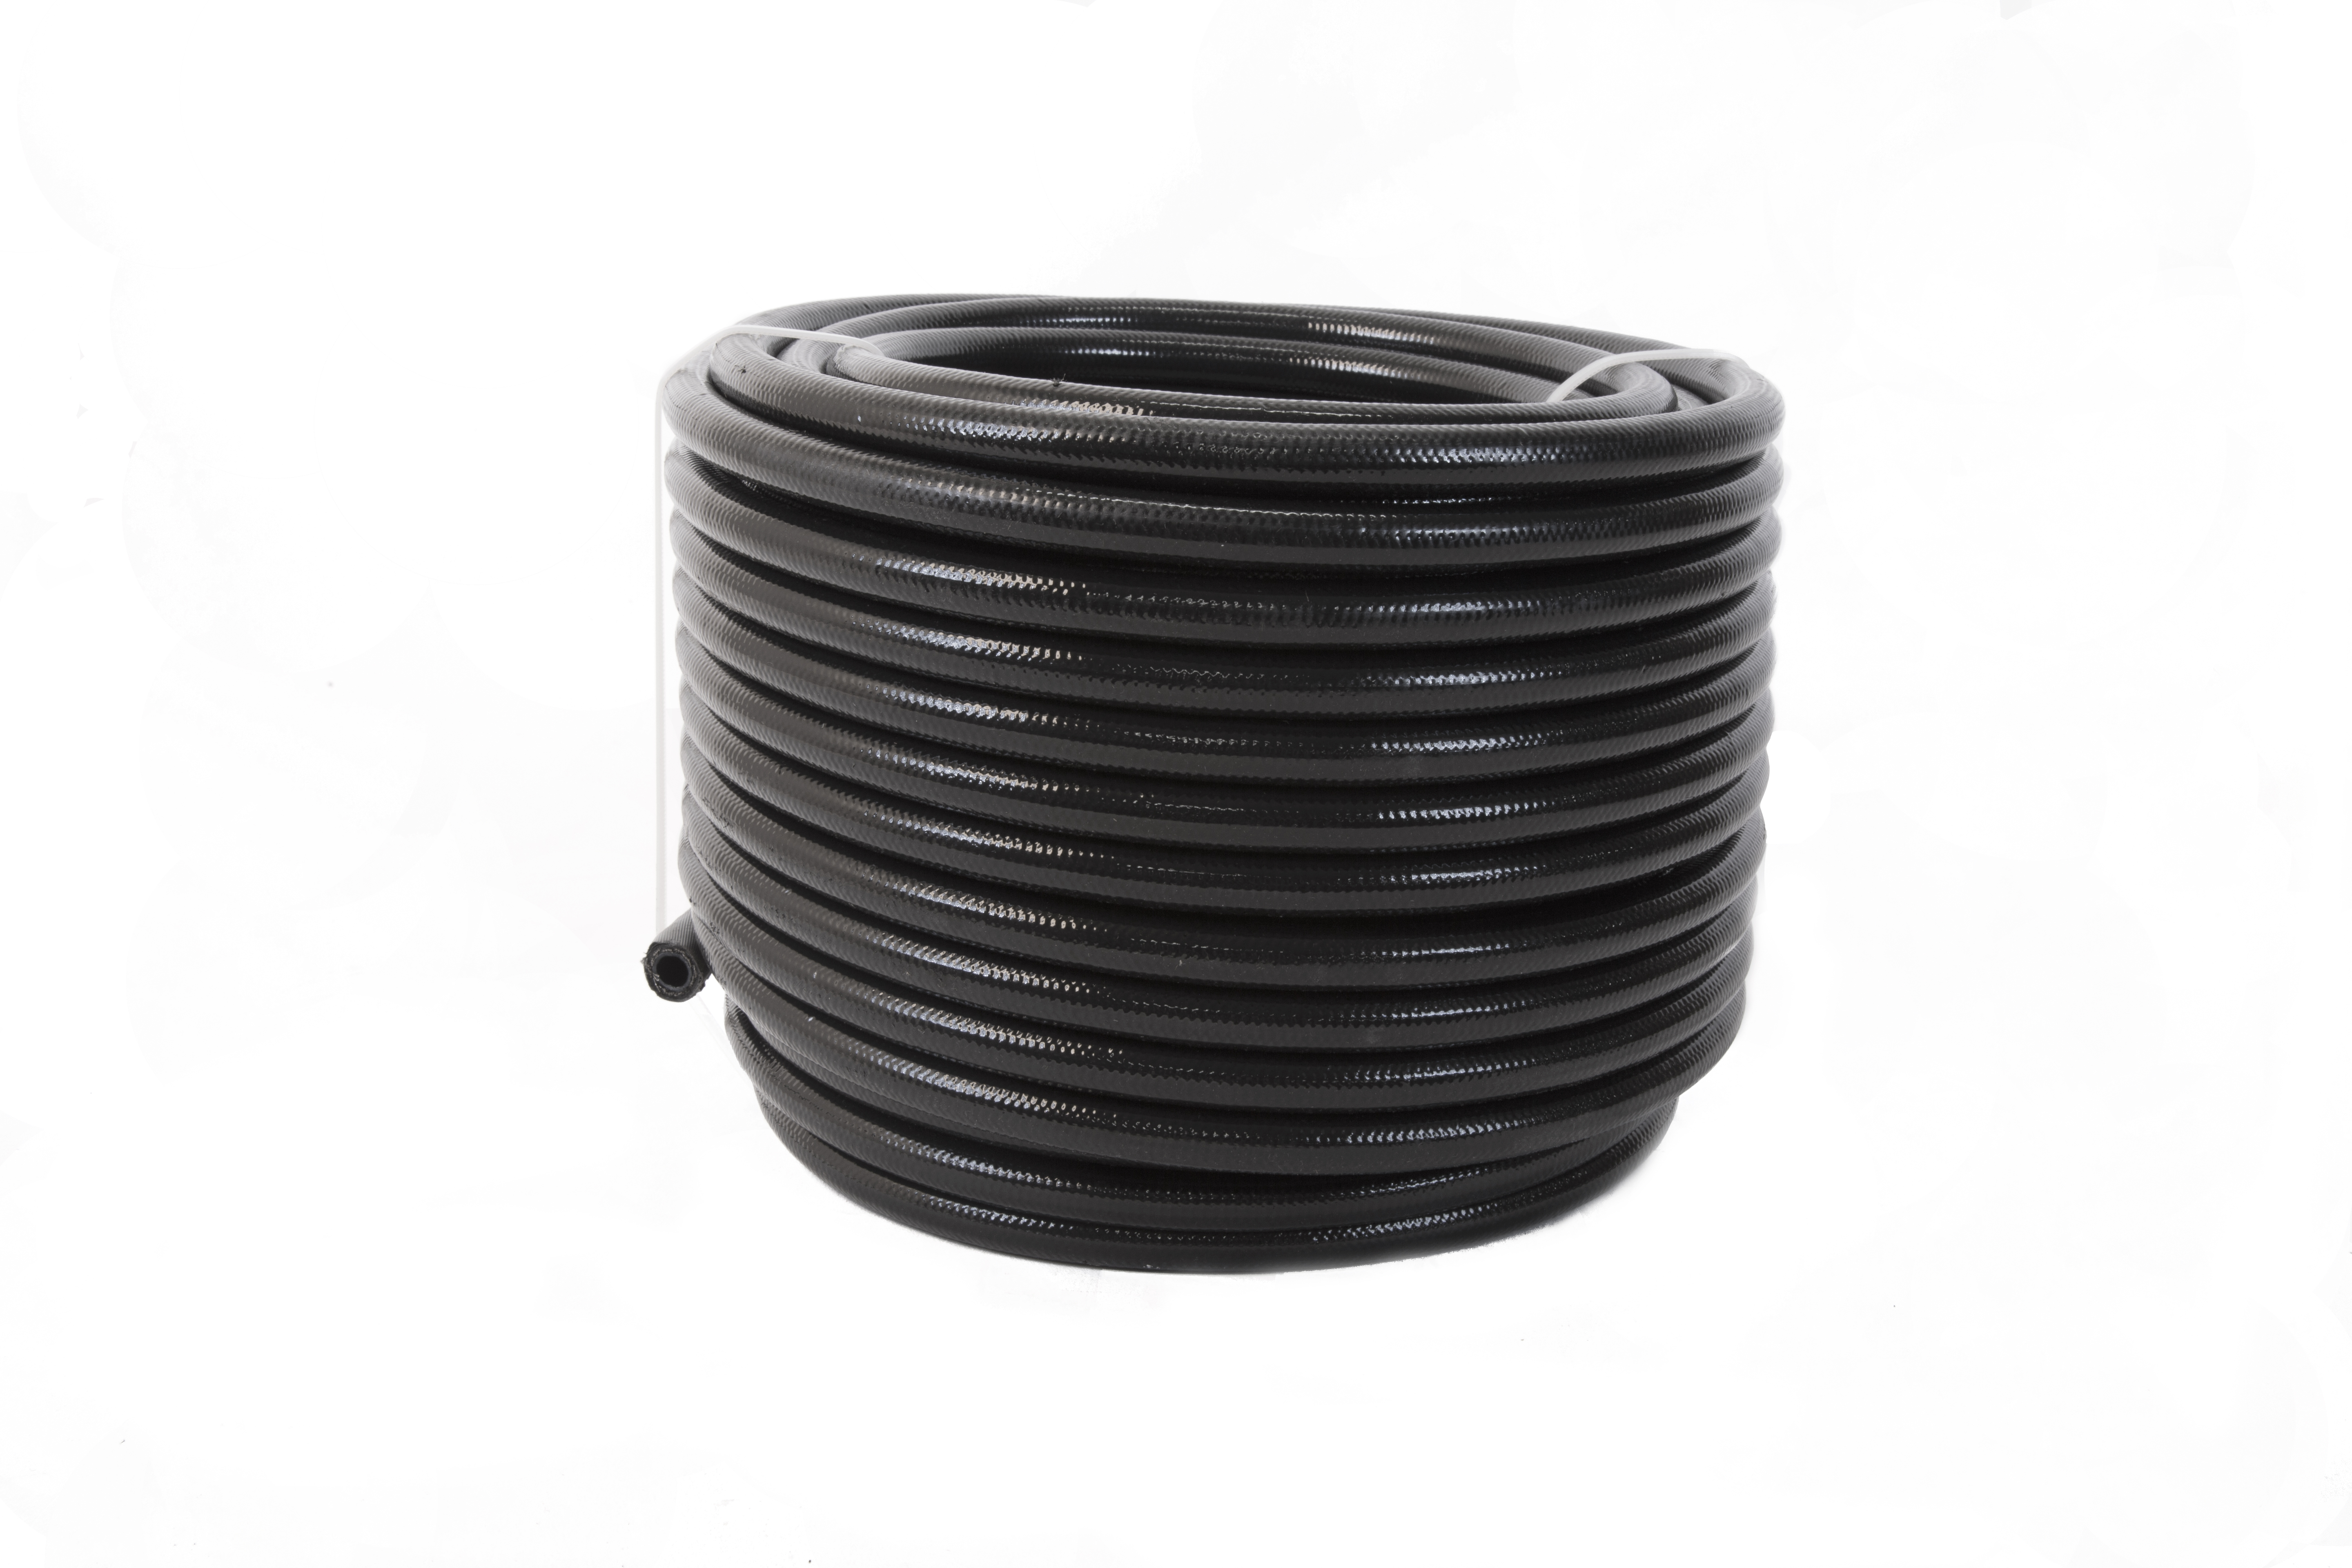 Aeromotive 15337 Hose, 8 AN, 20 ft, Braided Stainless / PTFE, Black, Each